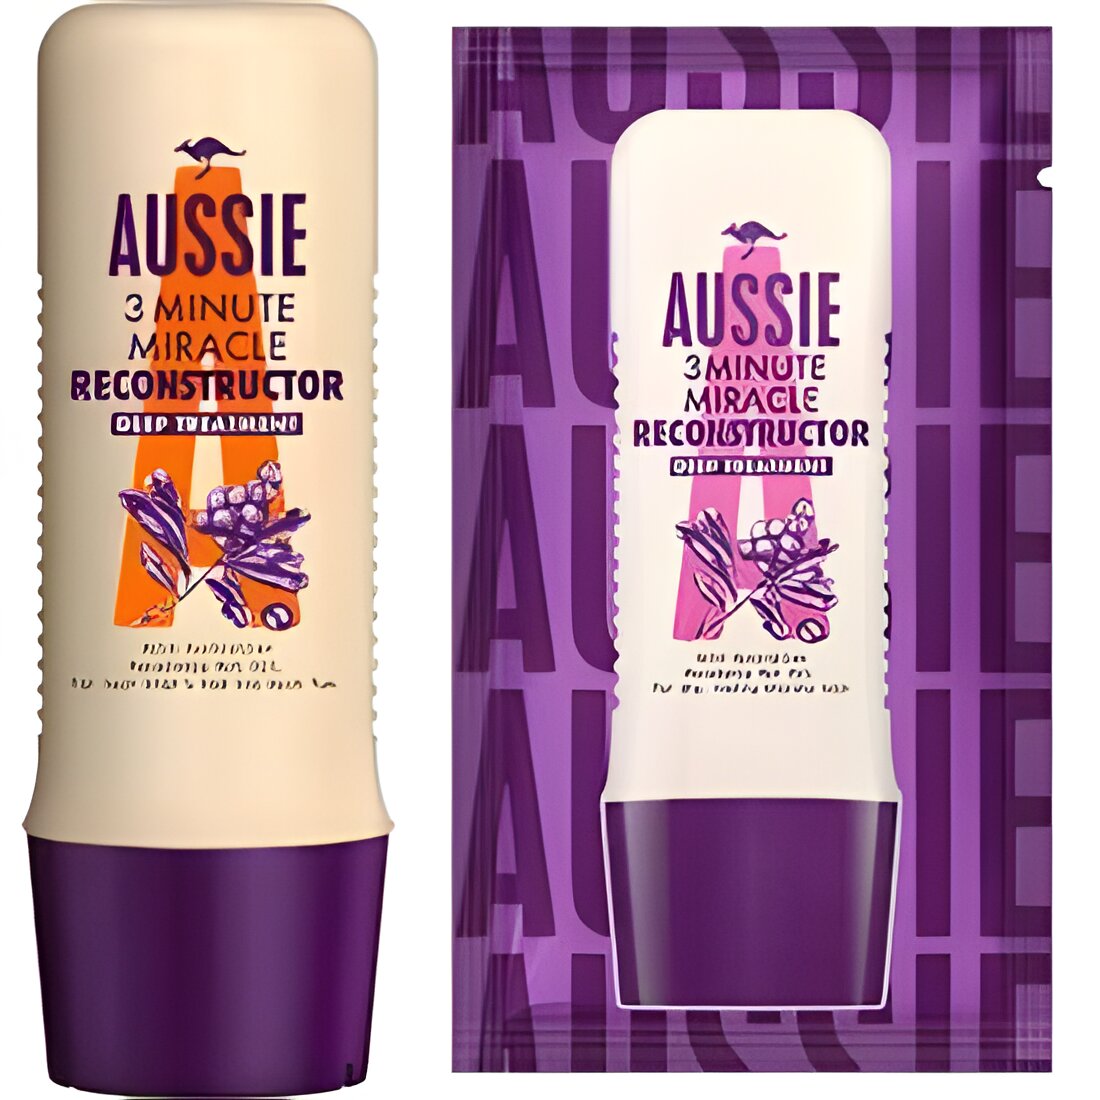 Free Aussie 3 Minute Miracle Reconstructor